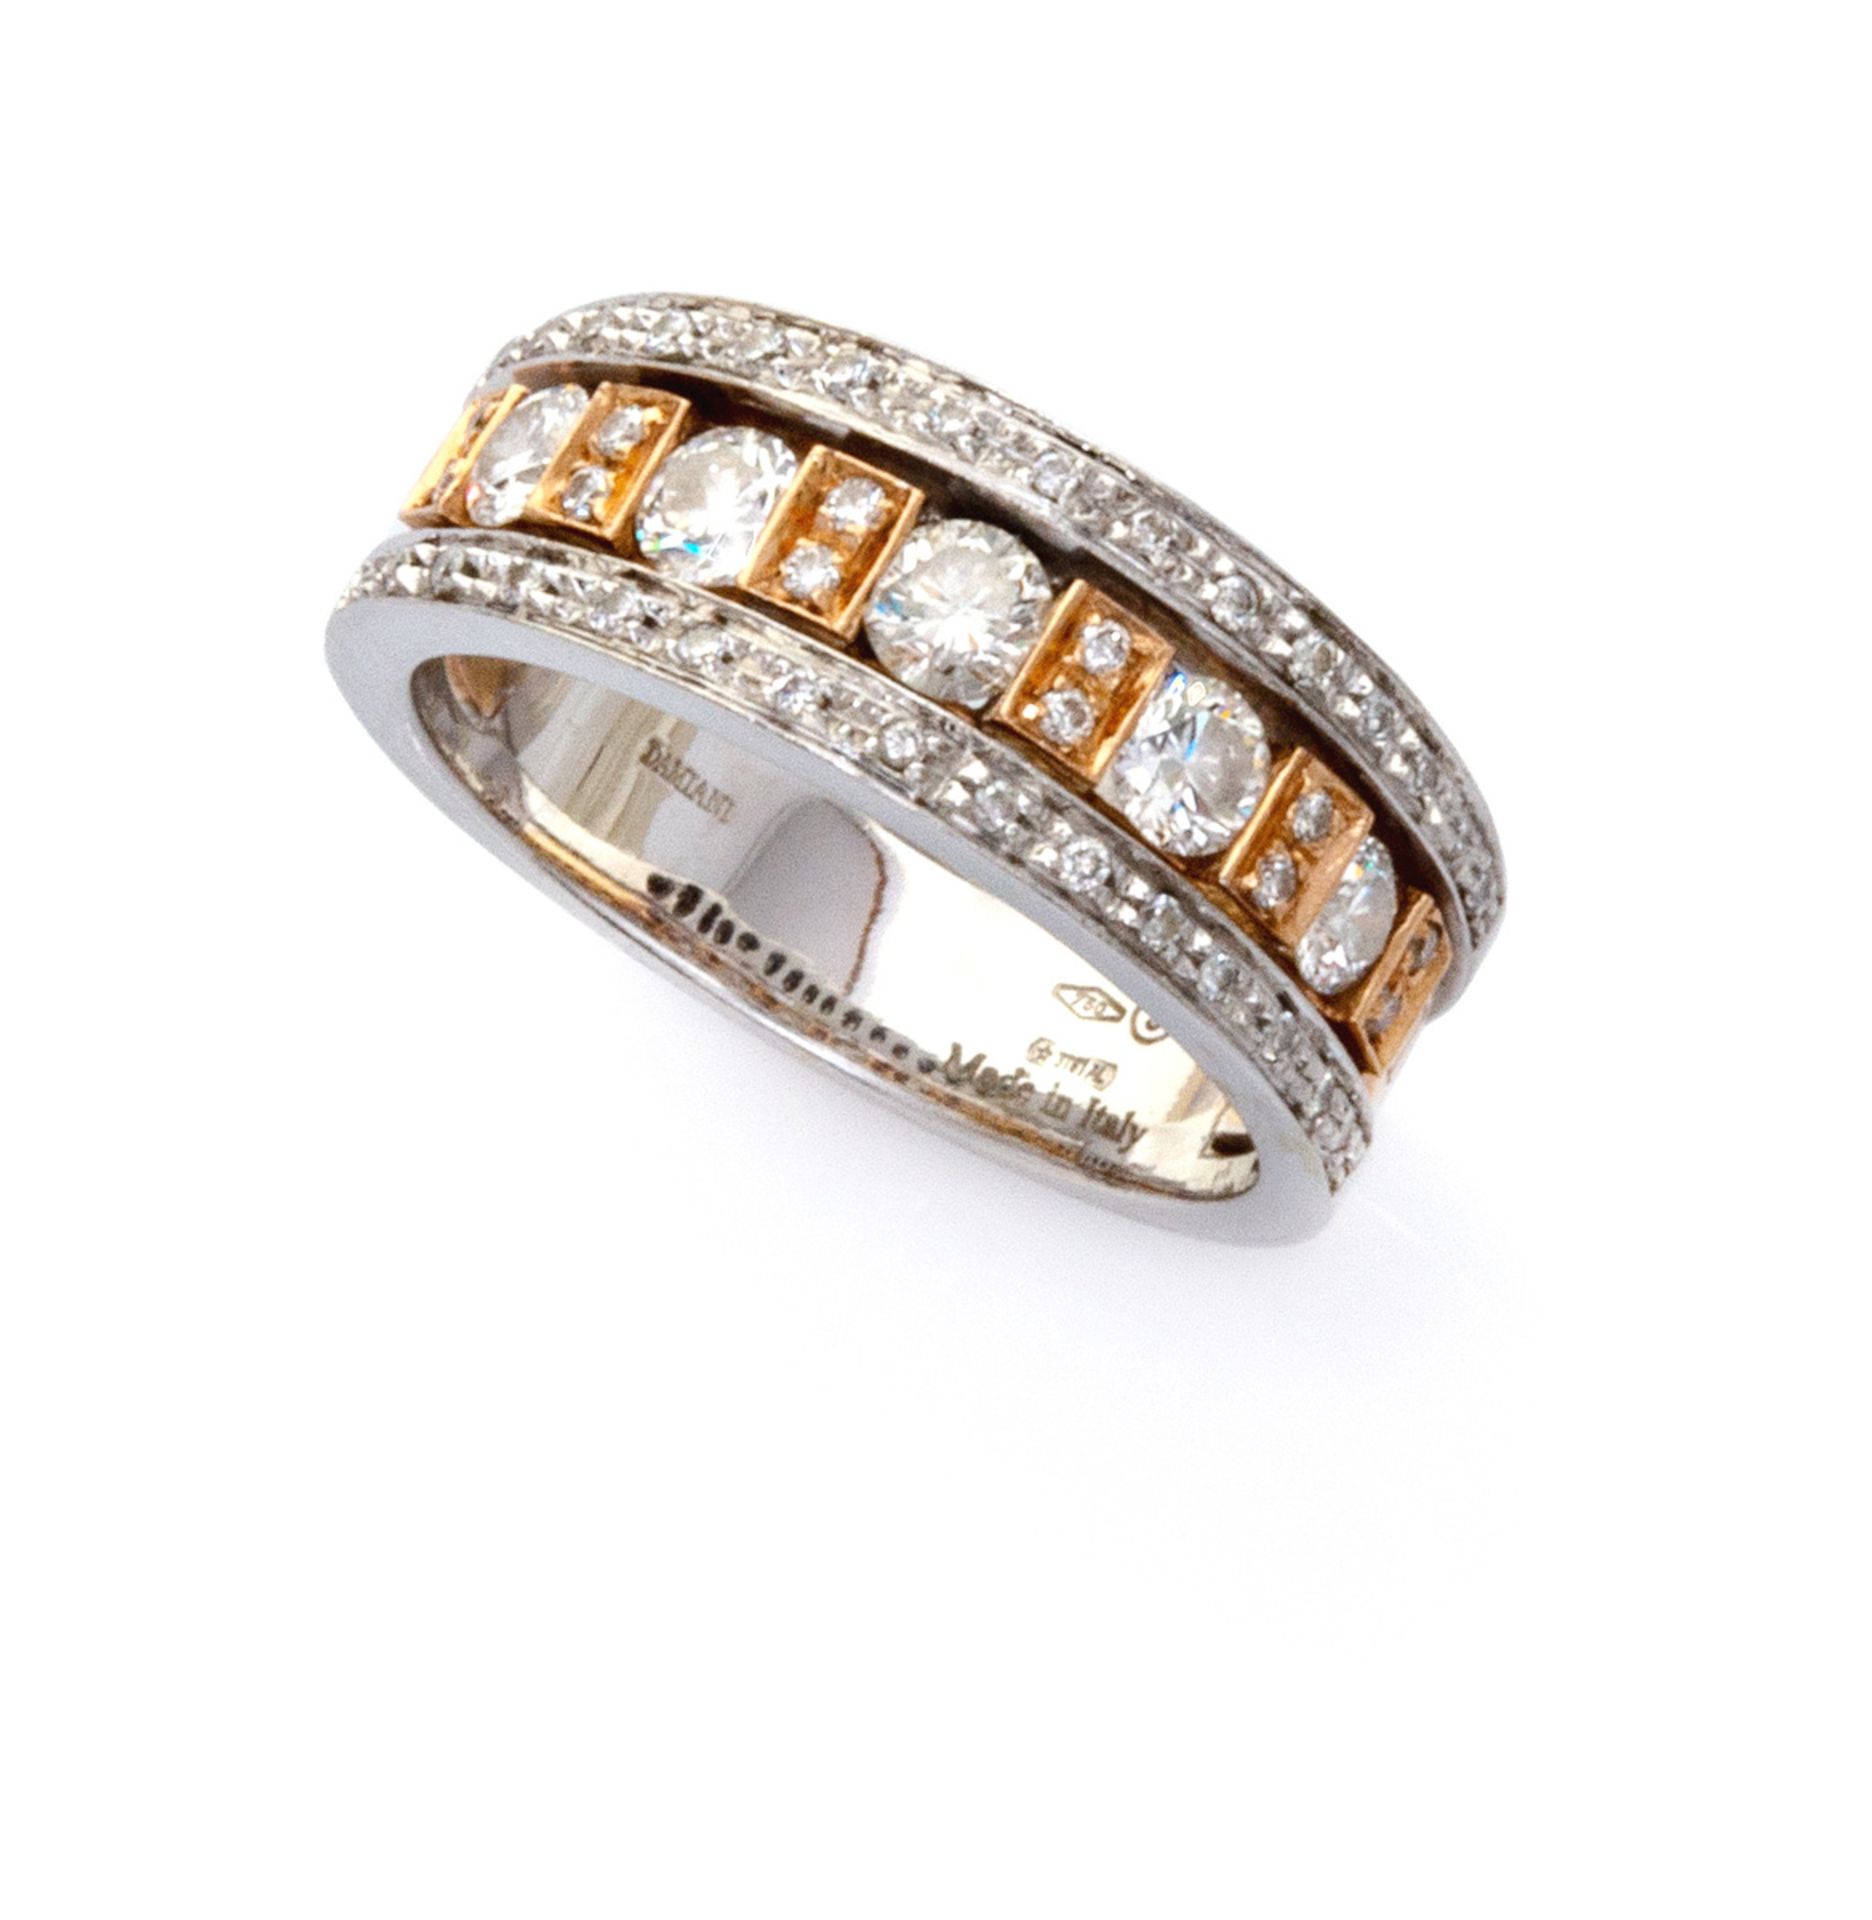 SPLENDID DIAMIANI RING in white and yellow gold 18 kts., band with lines of diamonds. Diamonds ct.